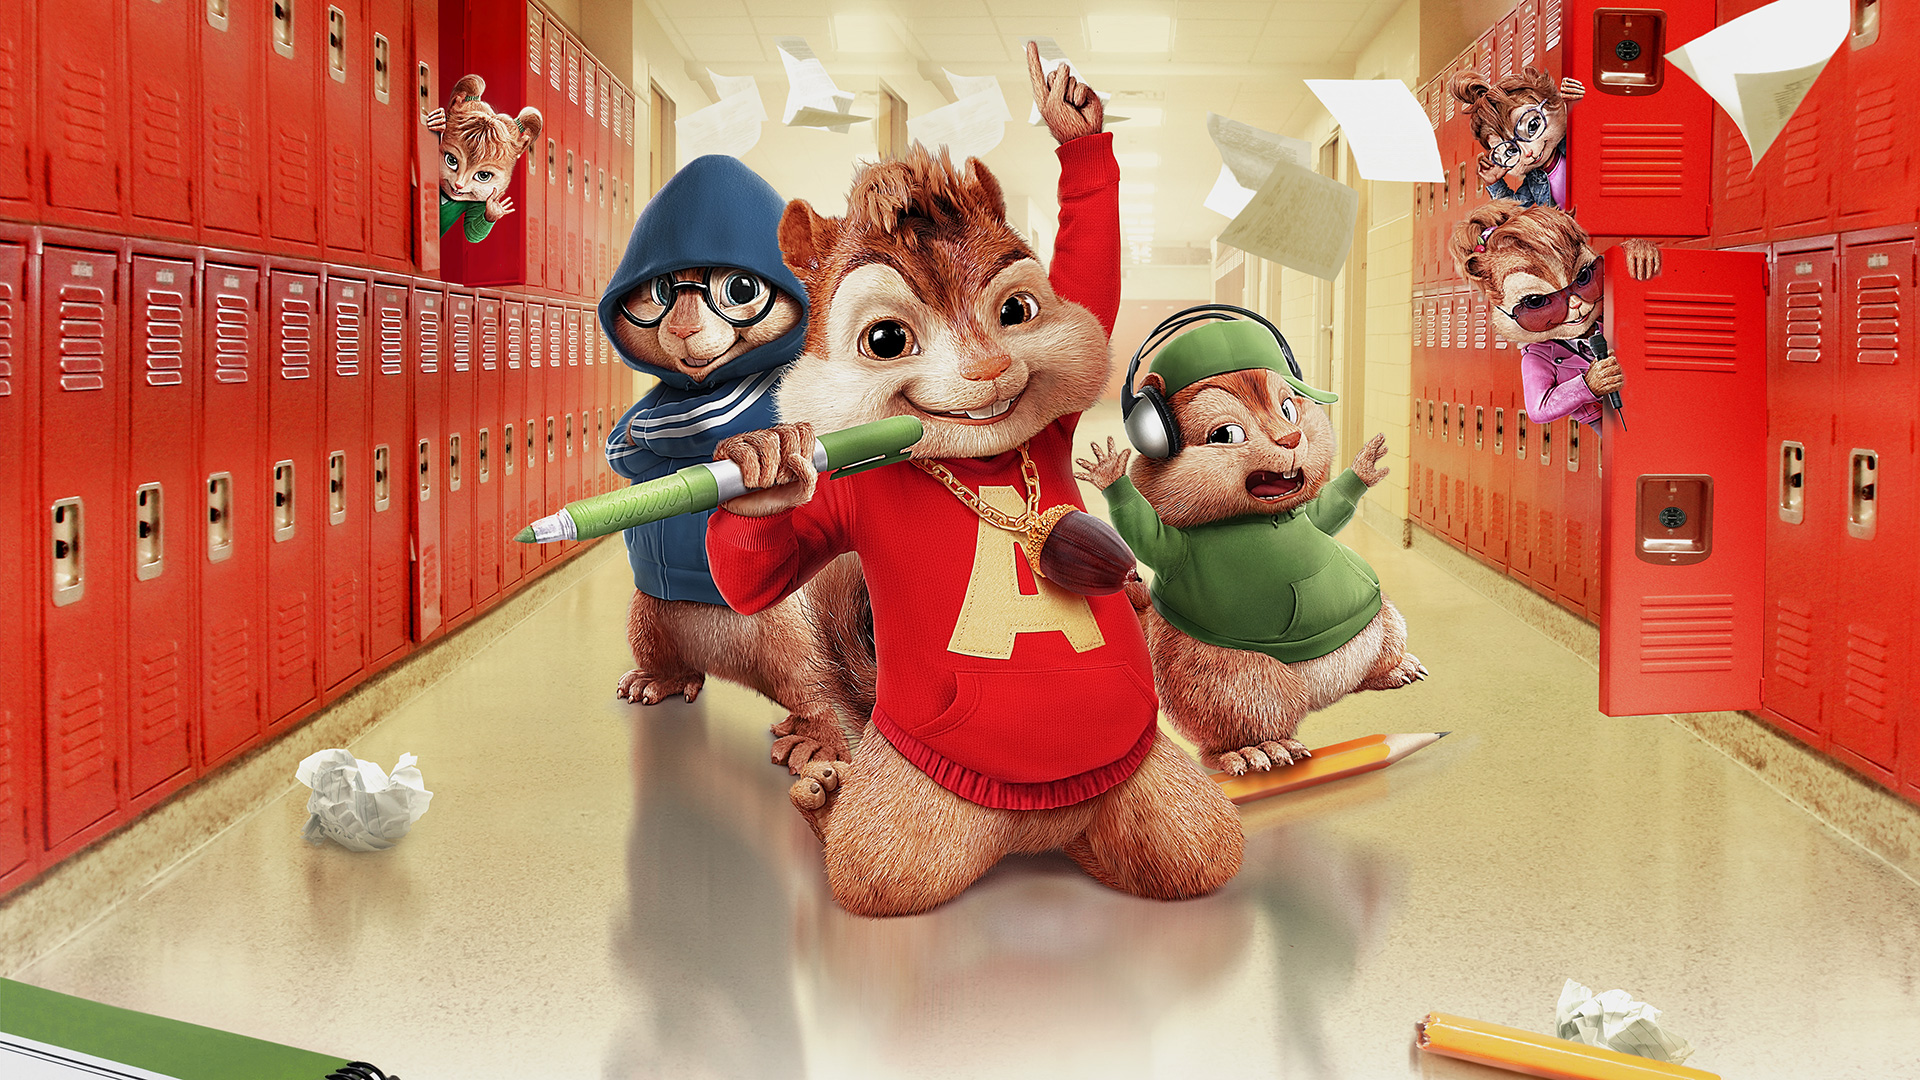 Newest Mobile Wallpaper Alvin And The Chipmunks: The Squeakquel